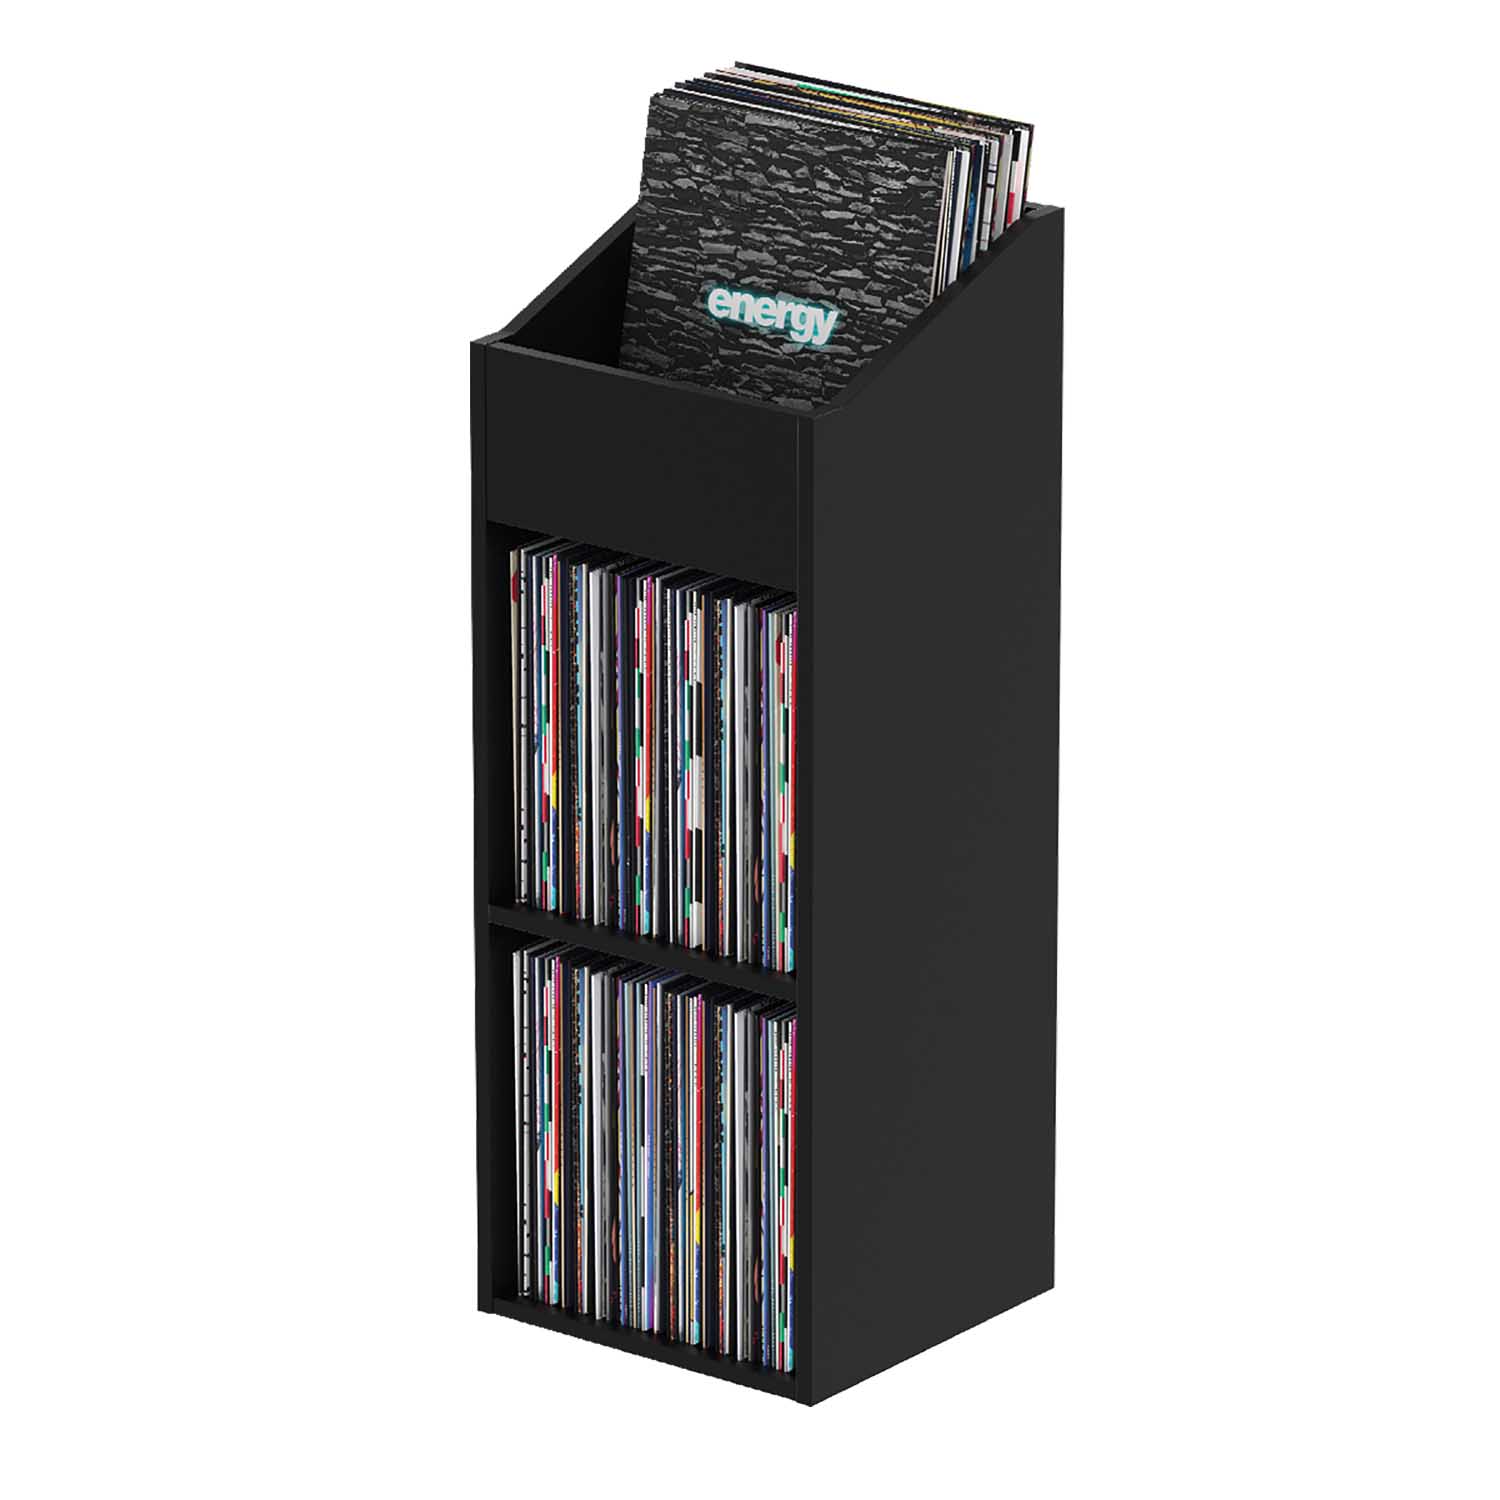 Glorious Record Rack 330 with 2-Piece Layout - Black - Hollywood DJ